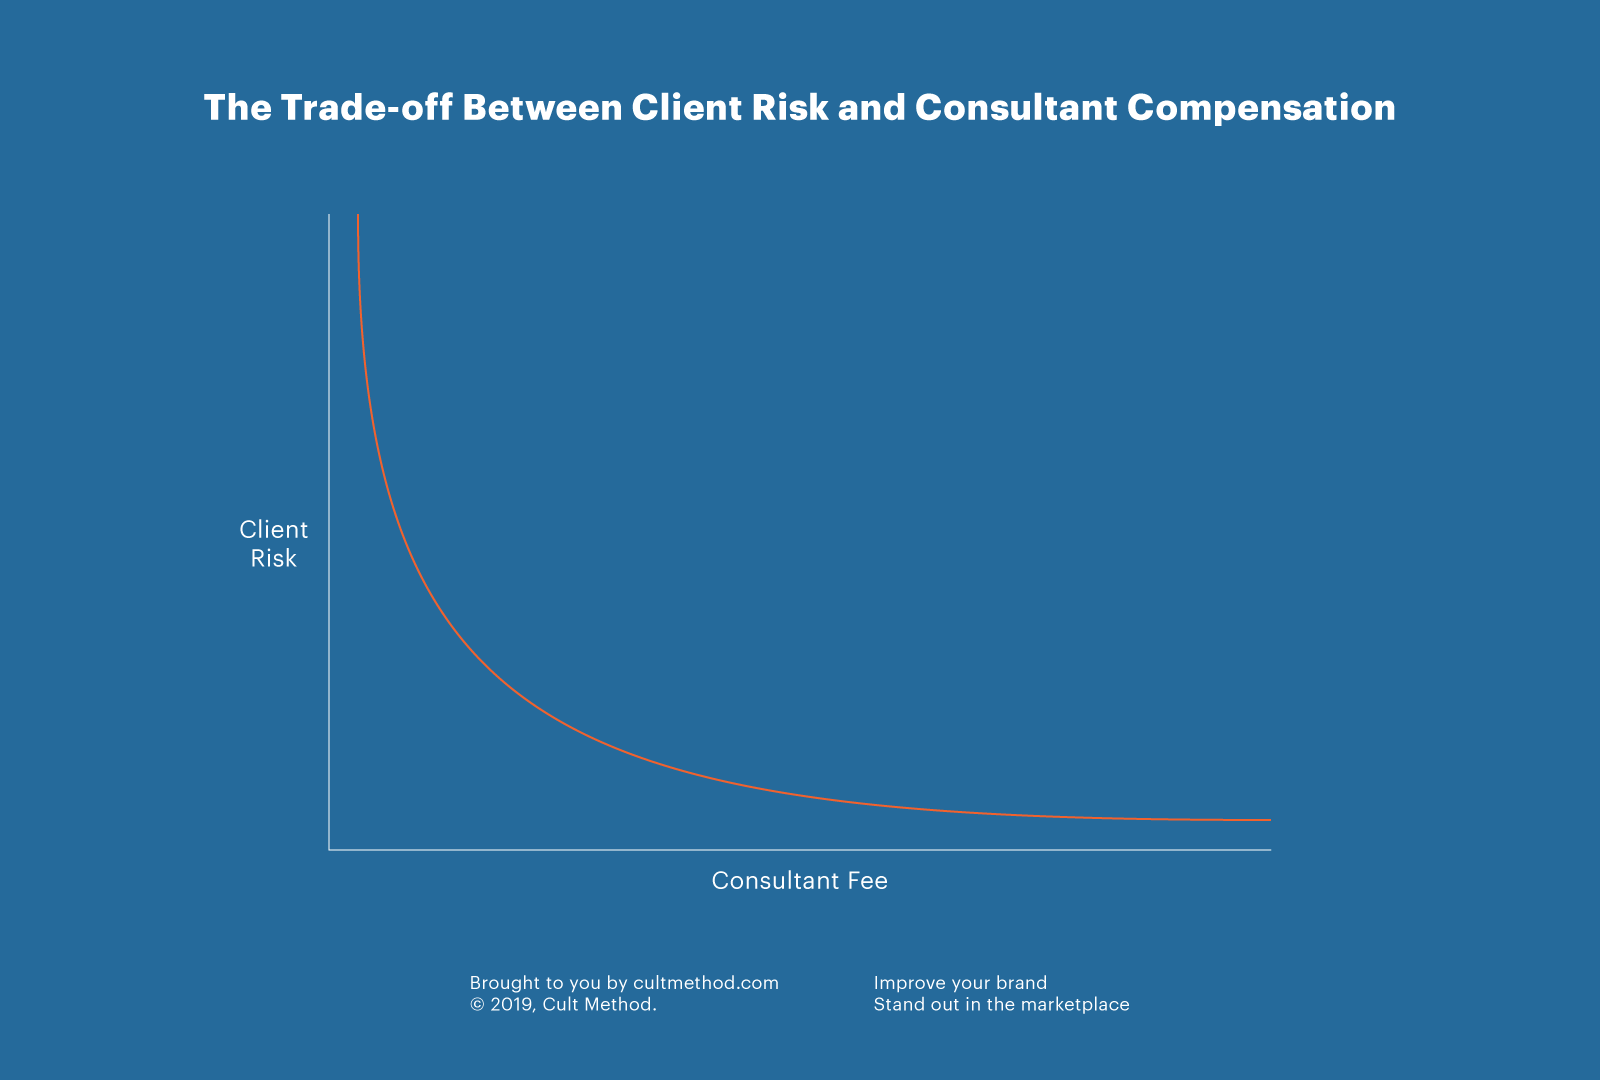 The trade-off between client risk and consultant compensation